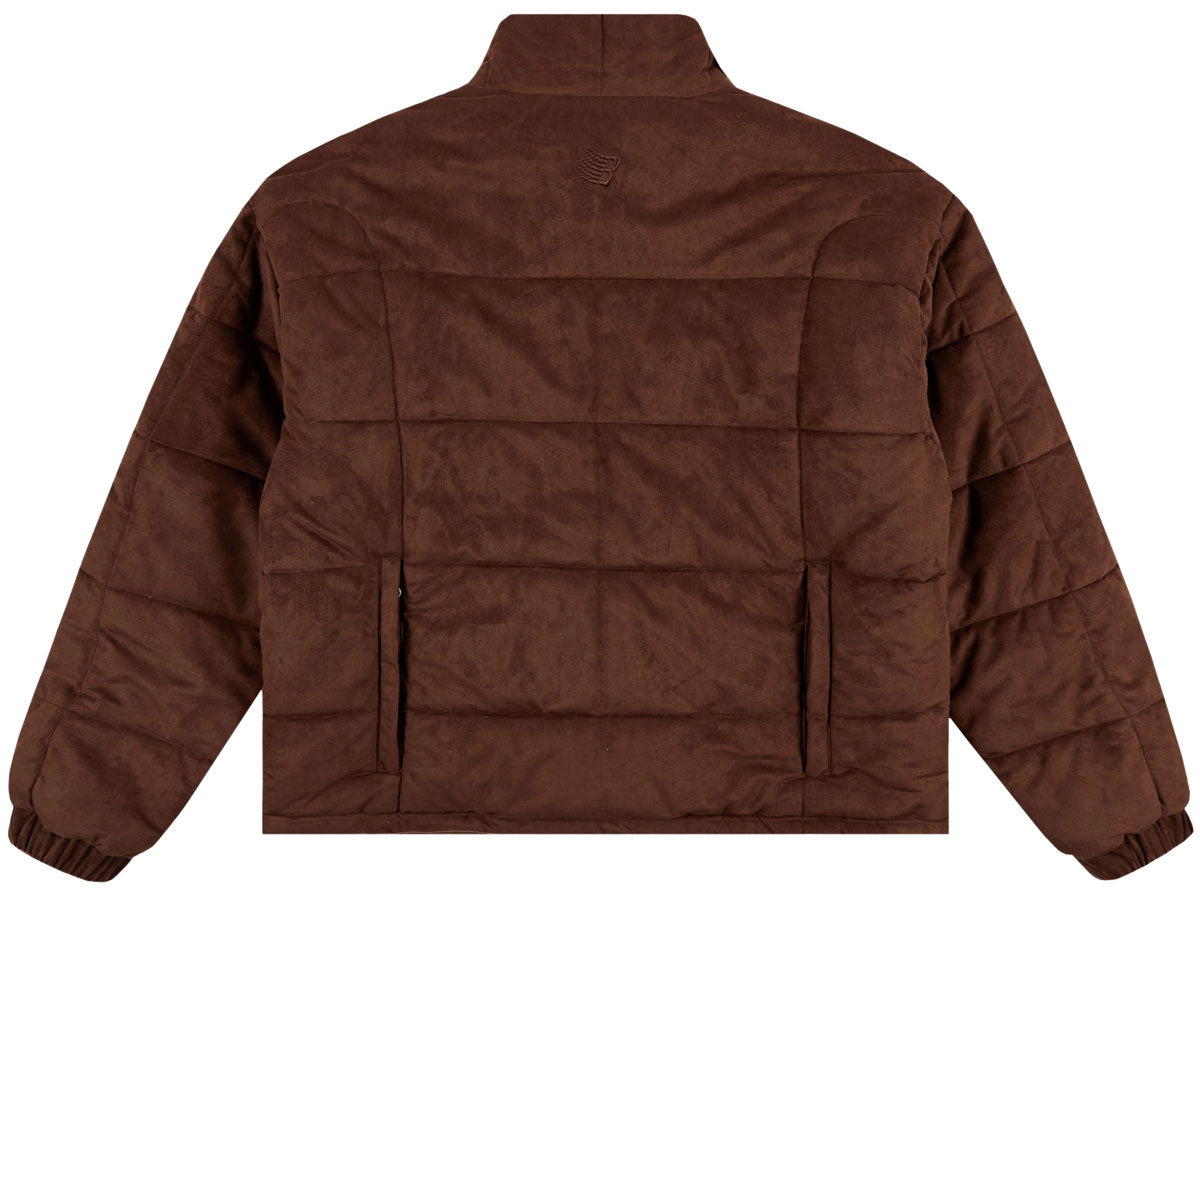 Bronze 56k Faux Suede Puffer Jacket - Brown image 2